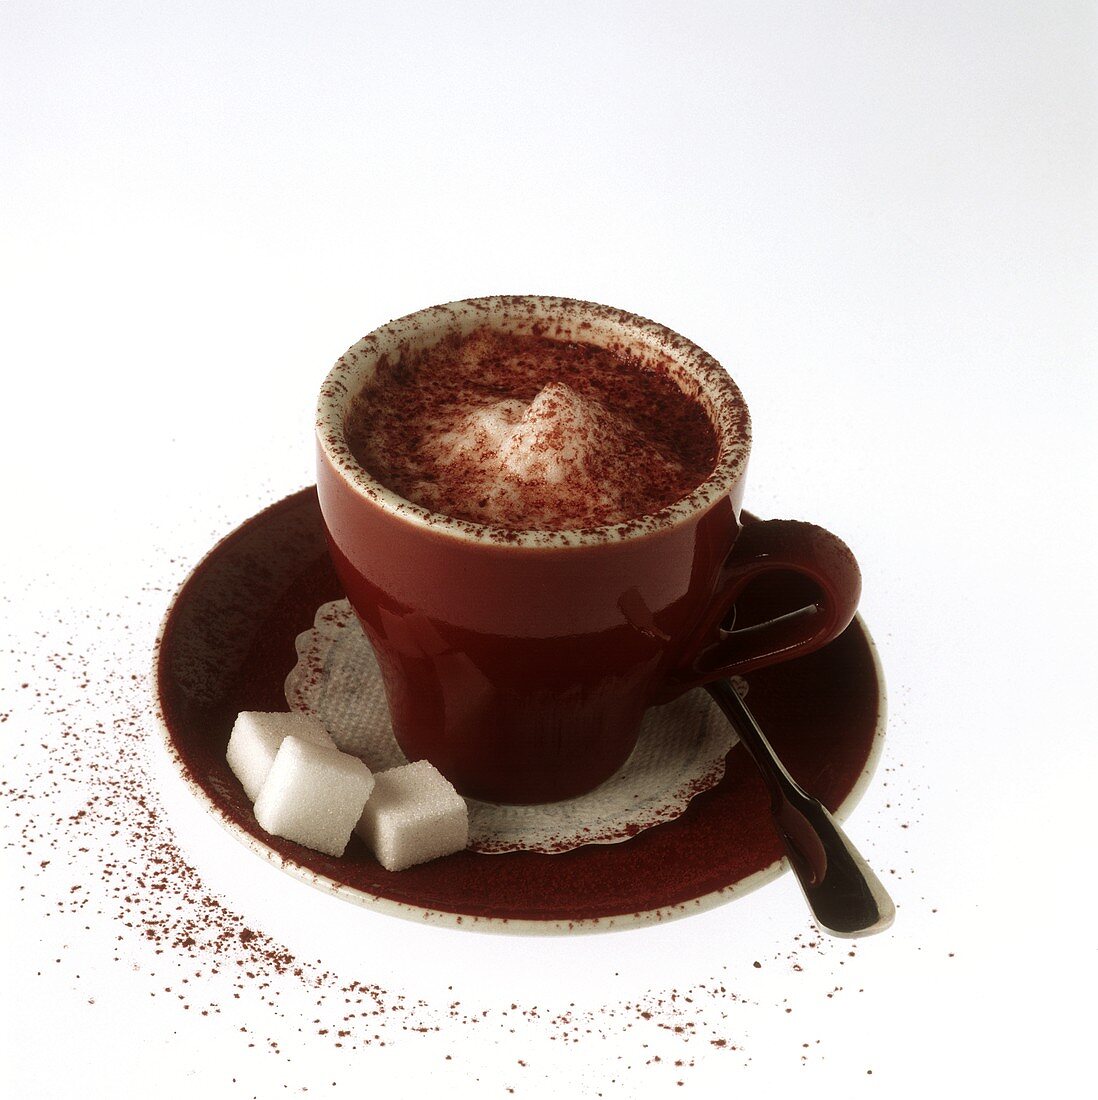 Cappuccino (coffee with frothed milk, Italy)